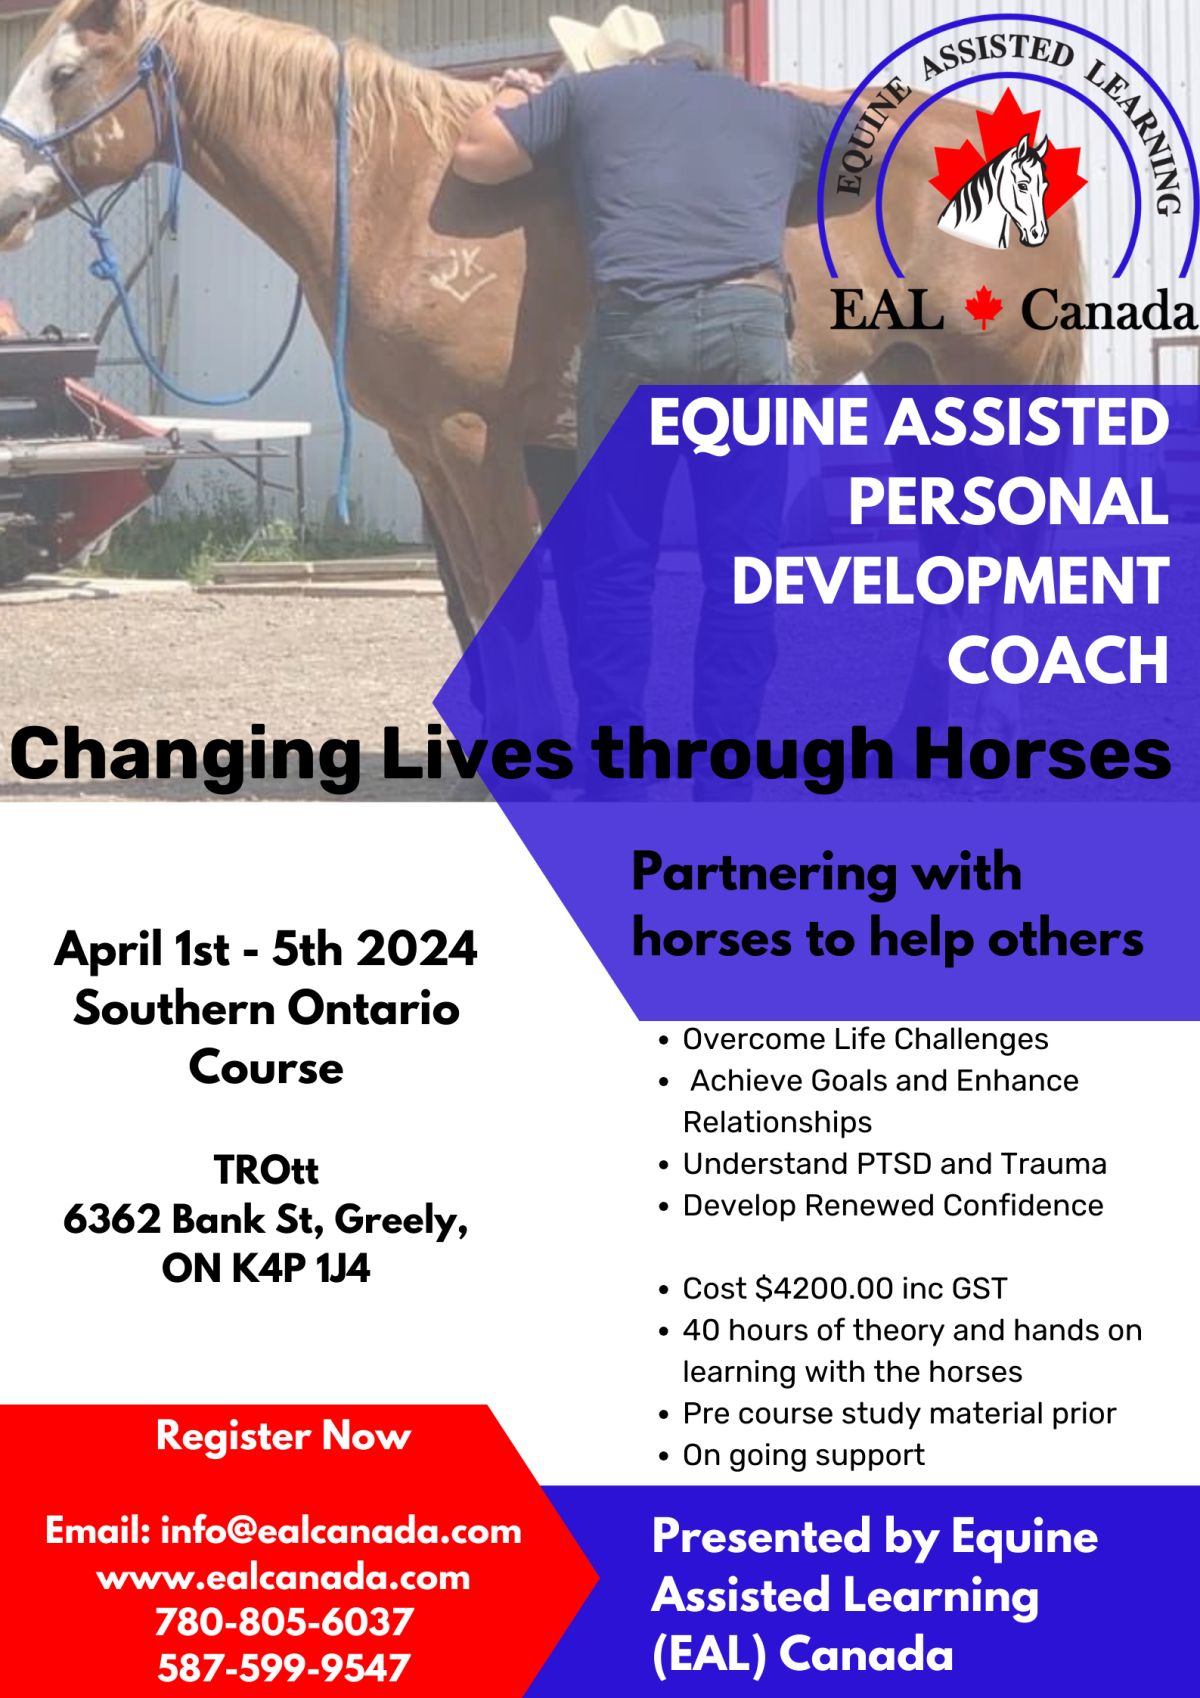 Flyer for Equine Assisted Learning Course April 1 to 5 at TROtt